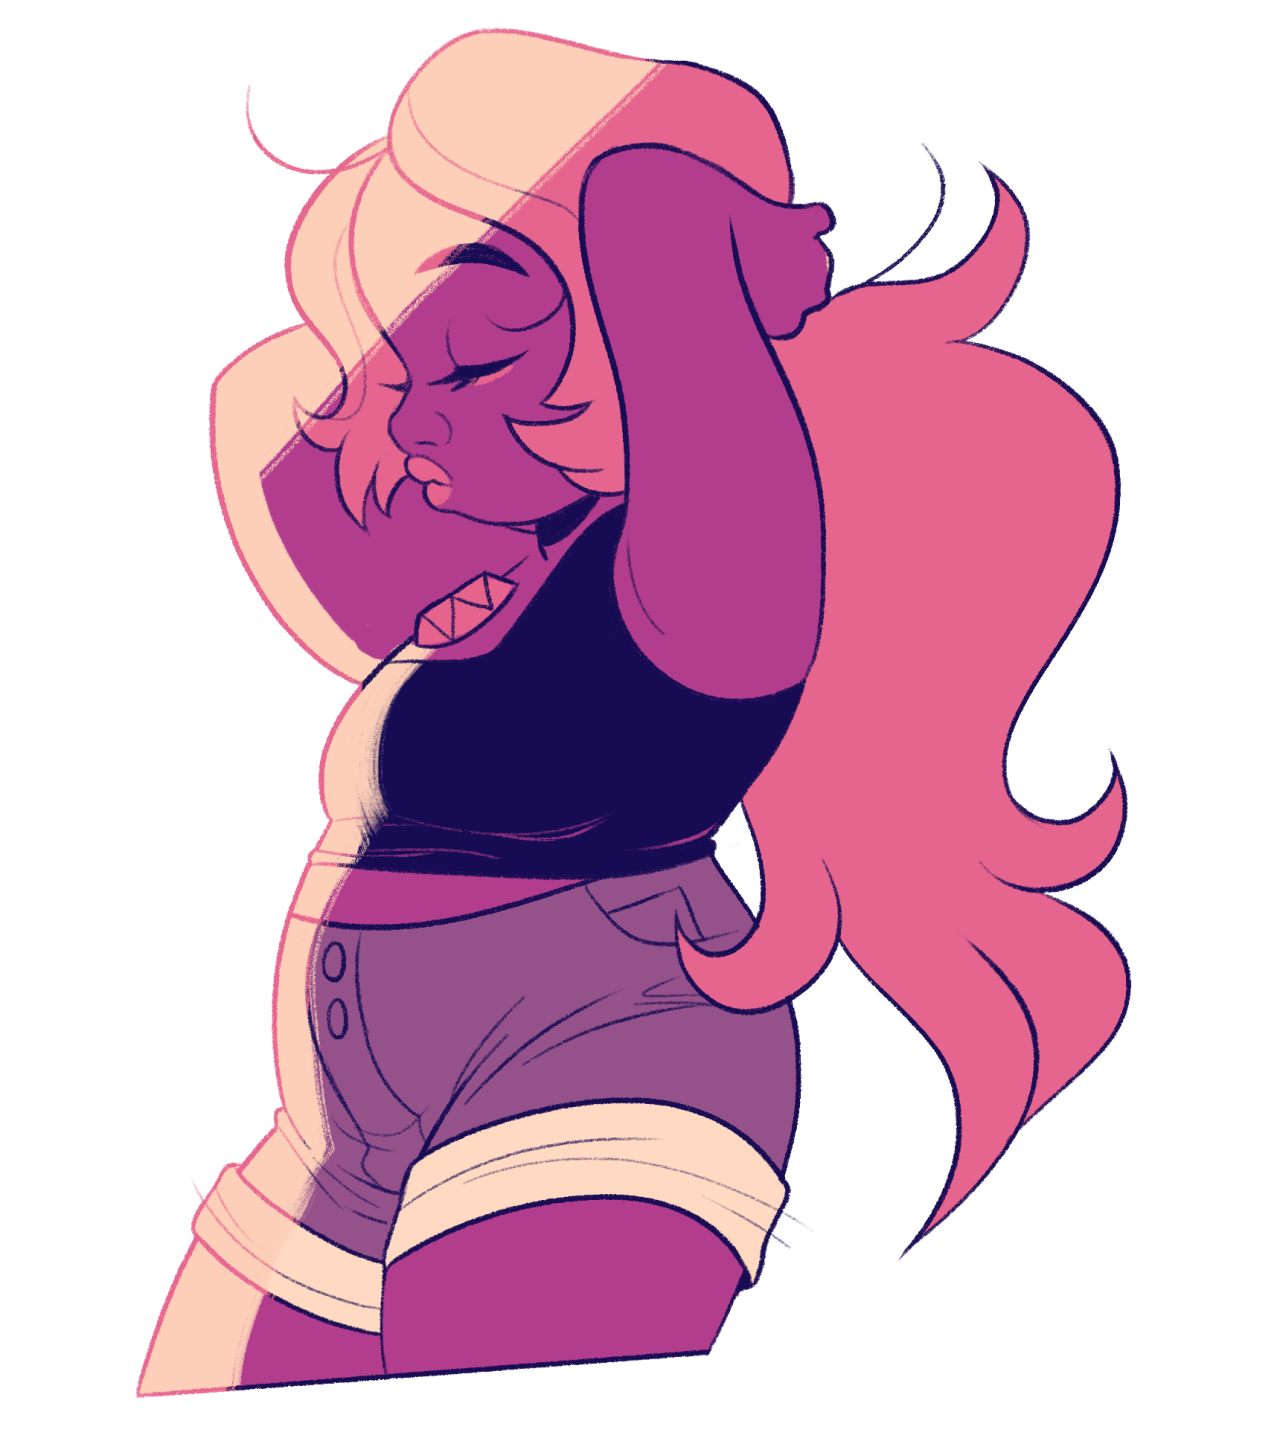 maddigzlz:  Can you do Amethyst from Steven Universe with #1 from that palette? // #1